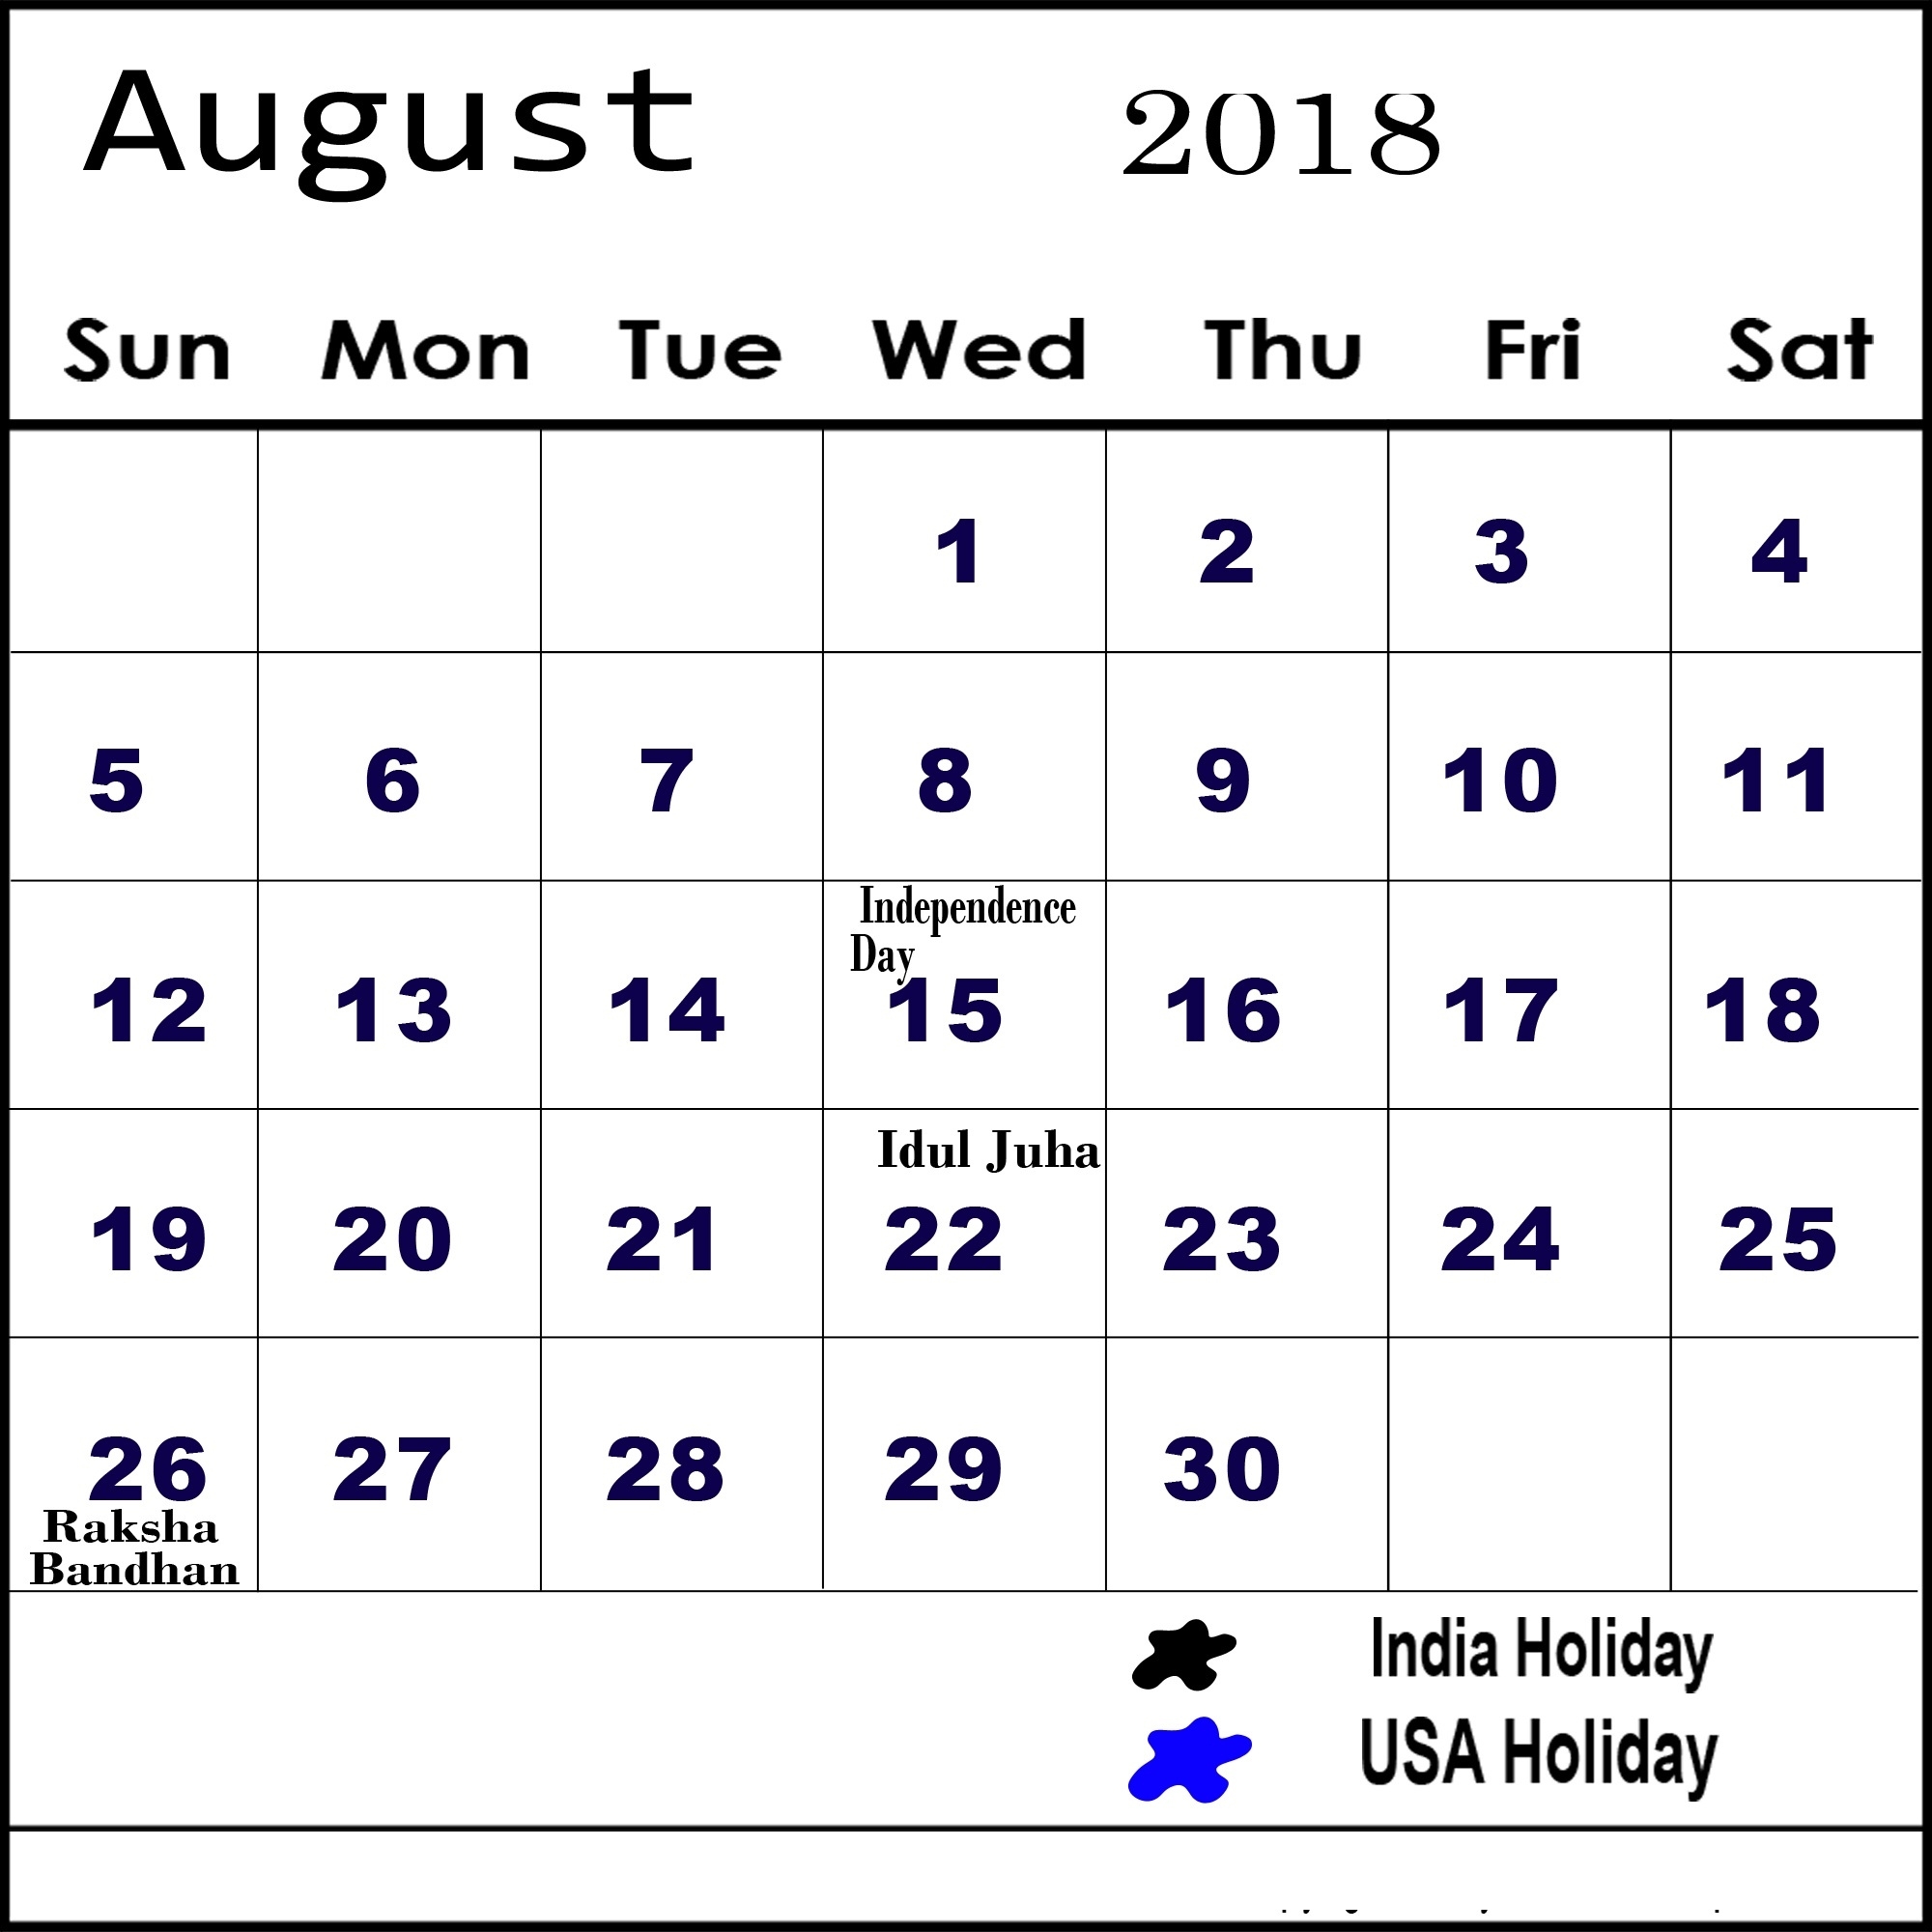 August 2018 Calendar With Daily Holidays And Events Calendar Holidays For August